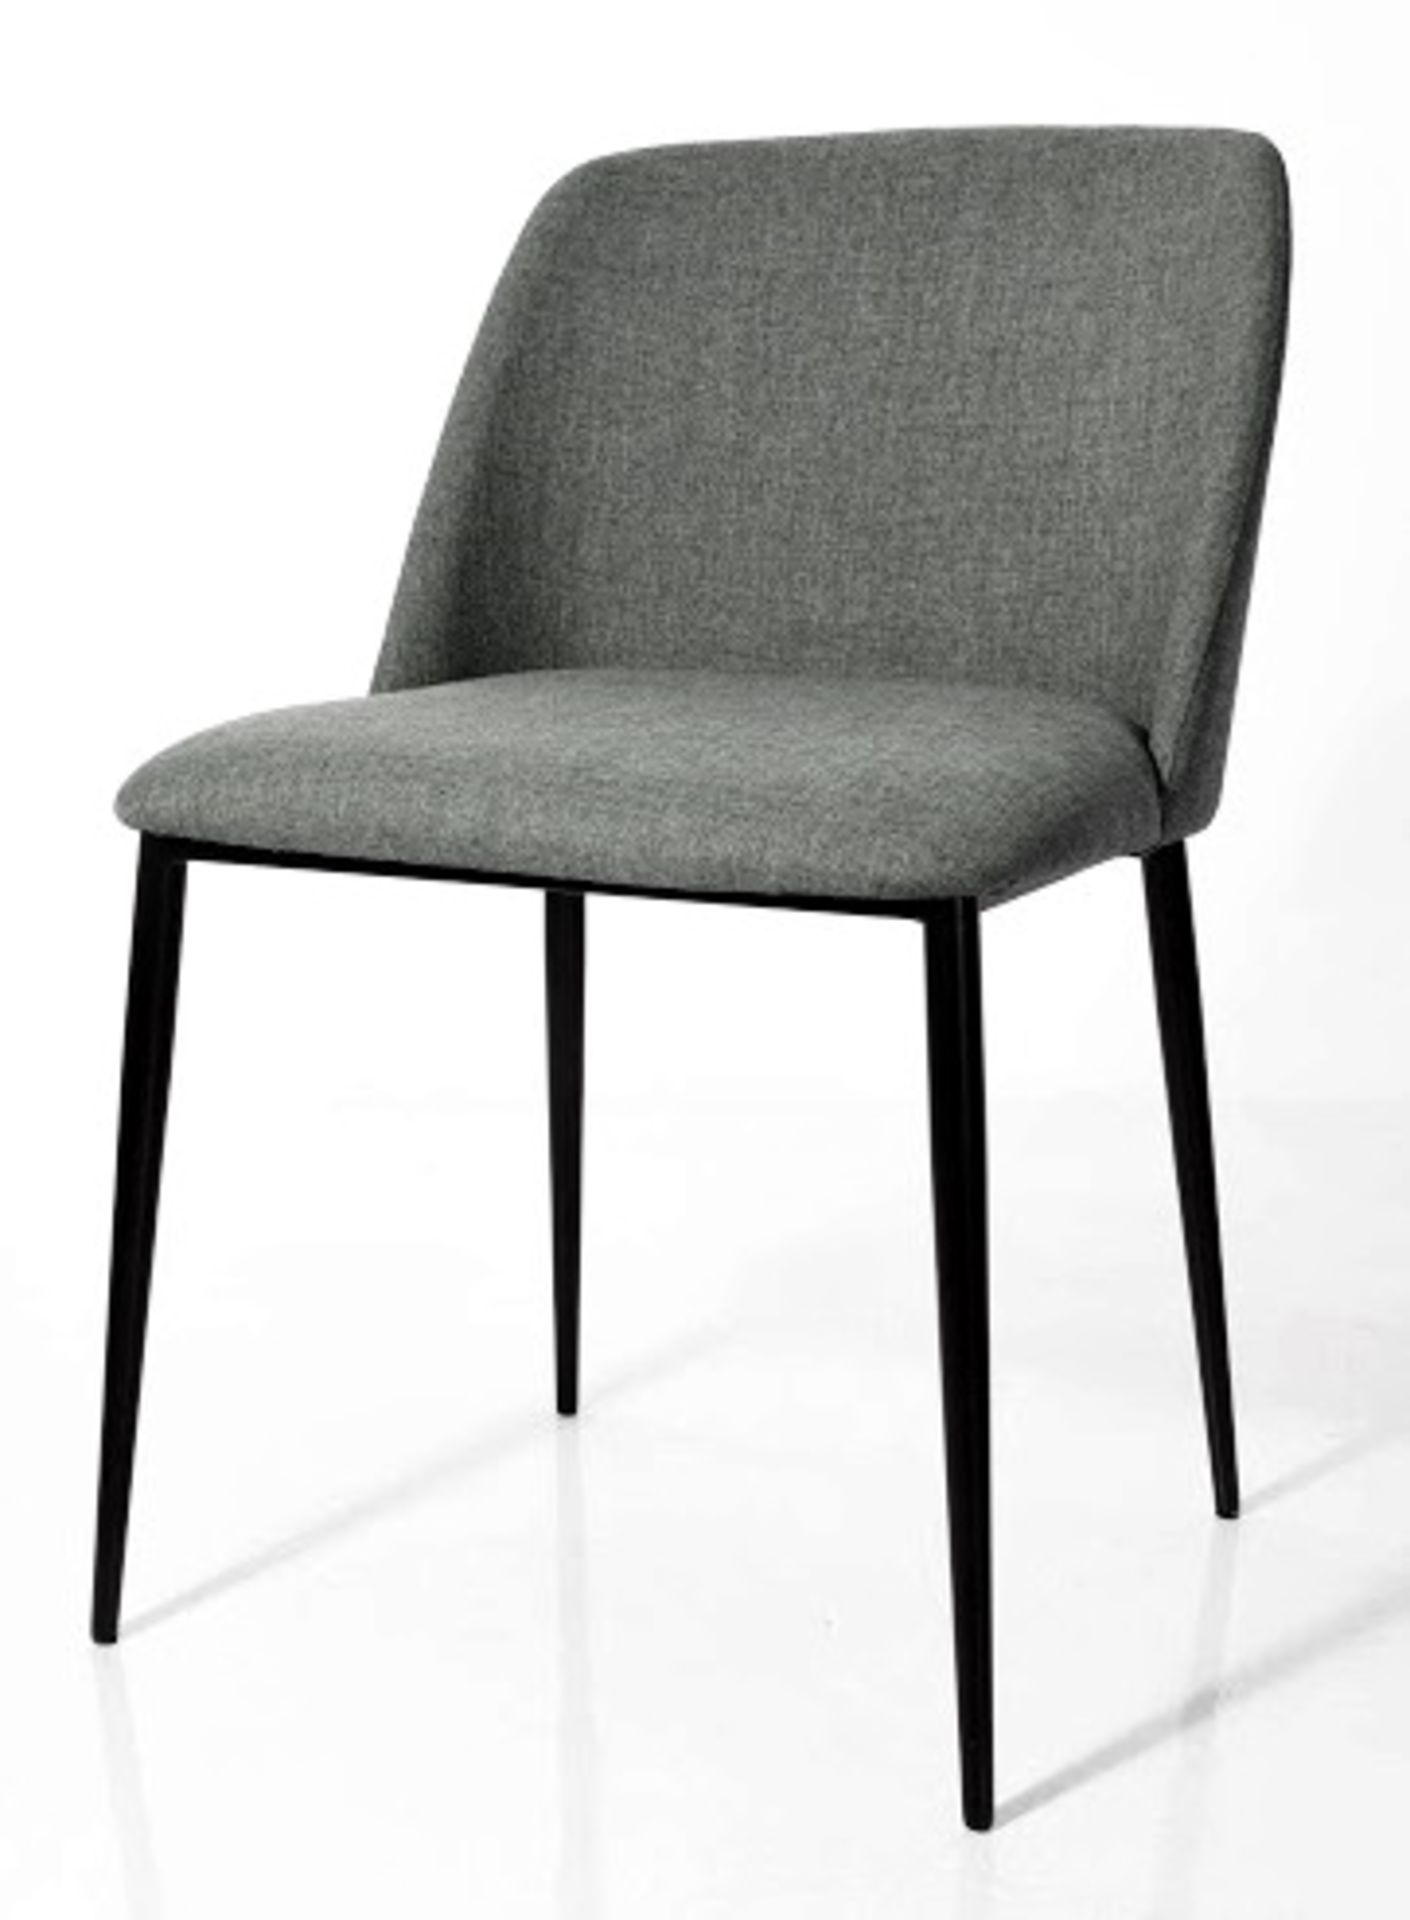 6 x FLANDERS Upholstered Contemporary Dining Chairs In Grey Fabric, With Slender Black Metal - Image 2 of 2